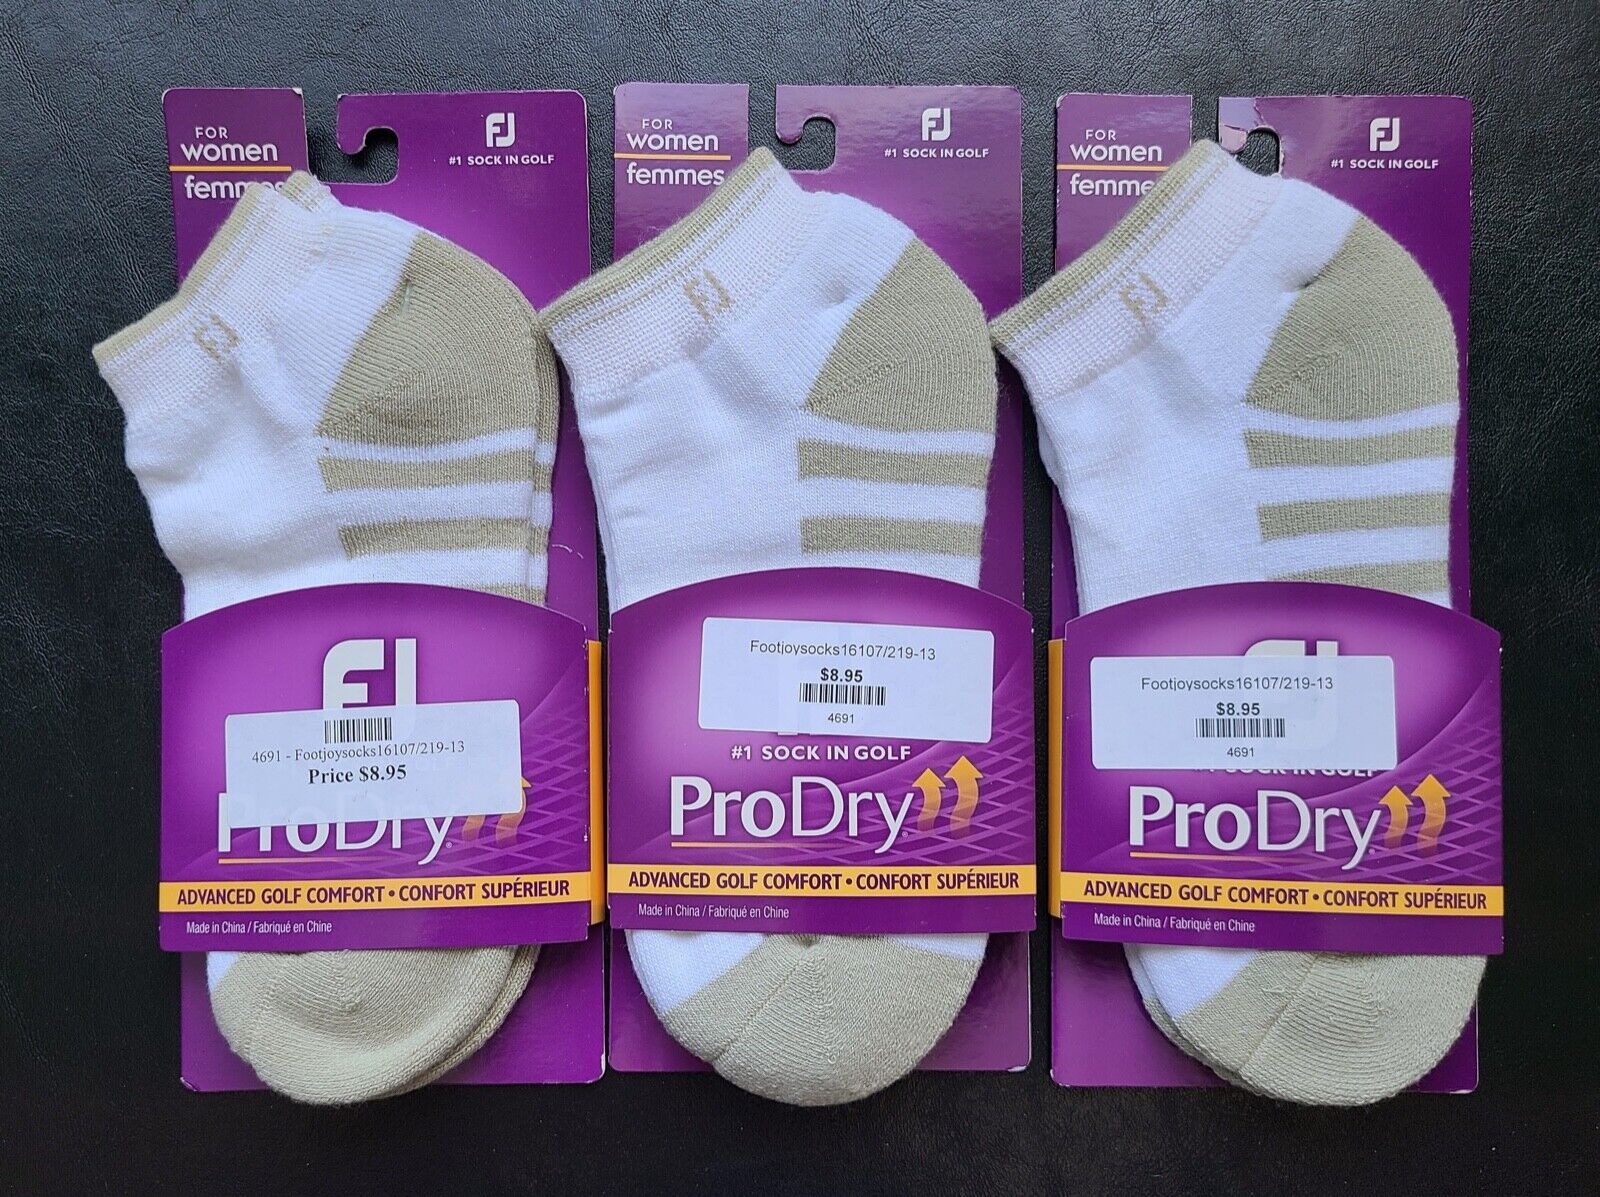 3 Pair New Women's Footjoy Sportlet Socks, Size: 6-9, Color: White/driftwood(a6)